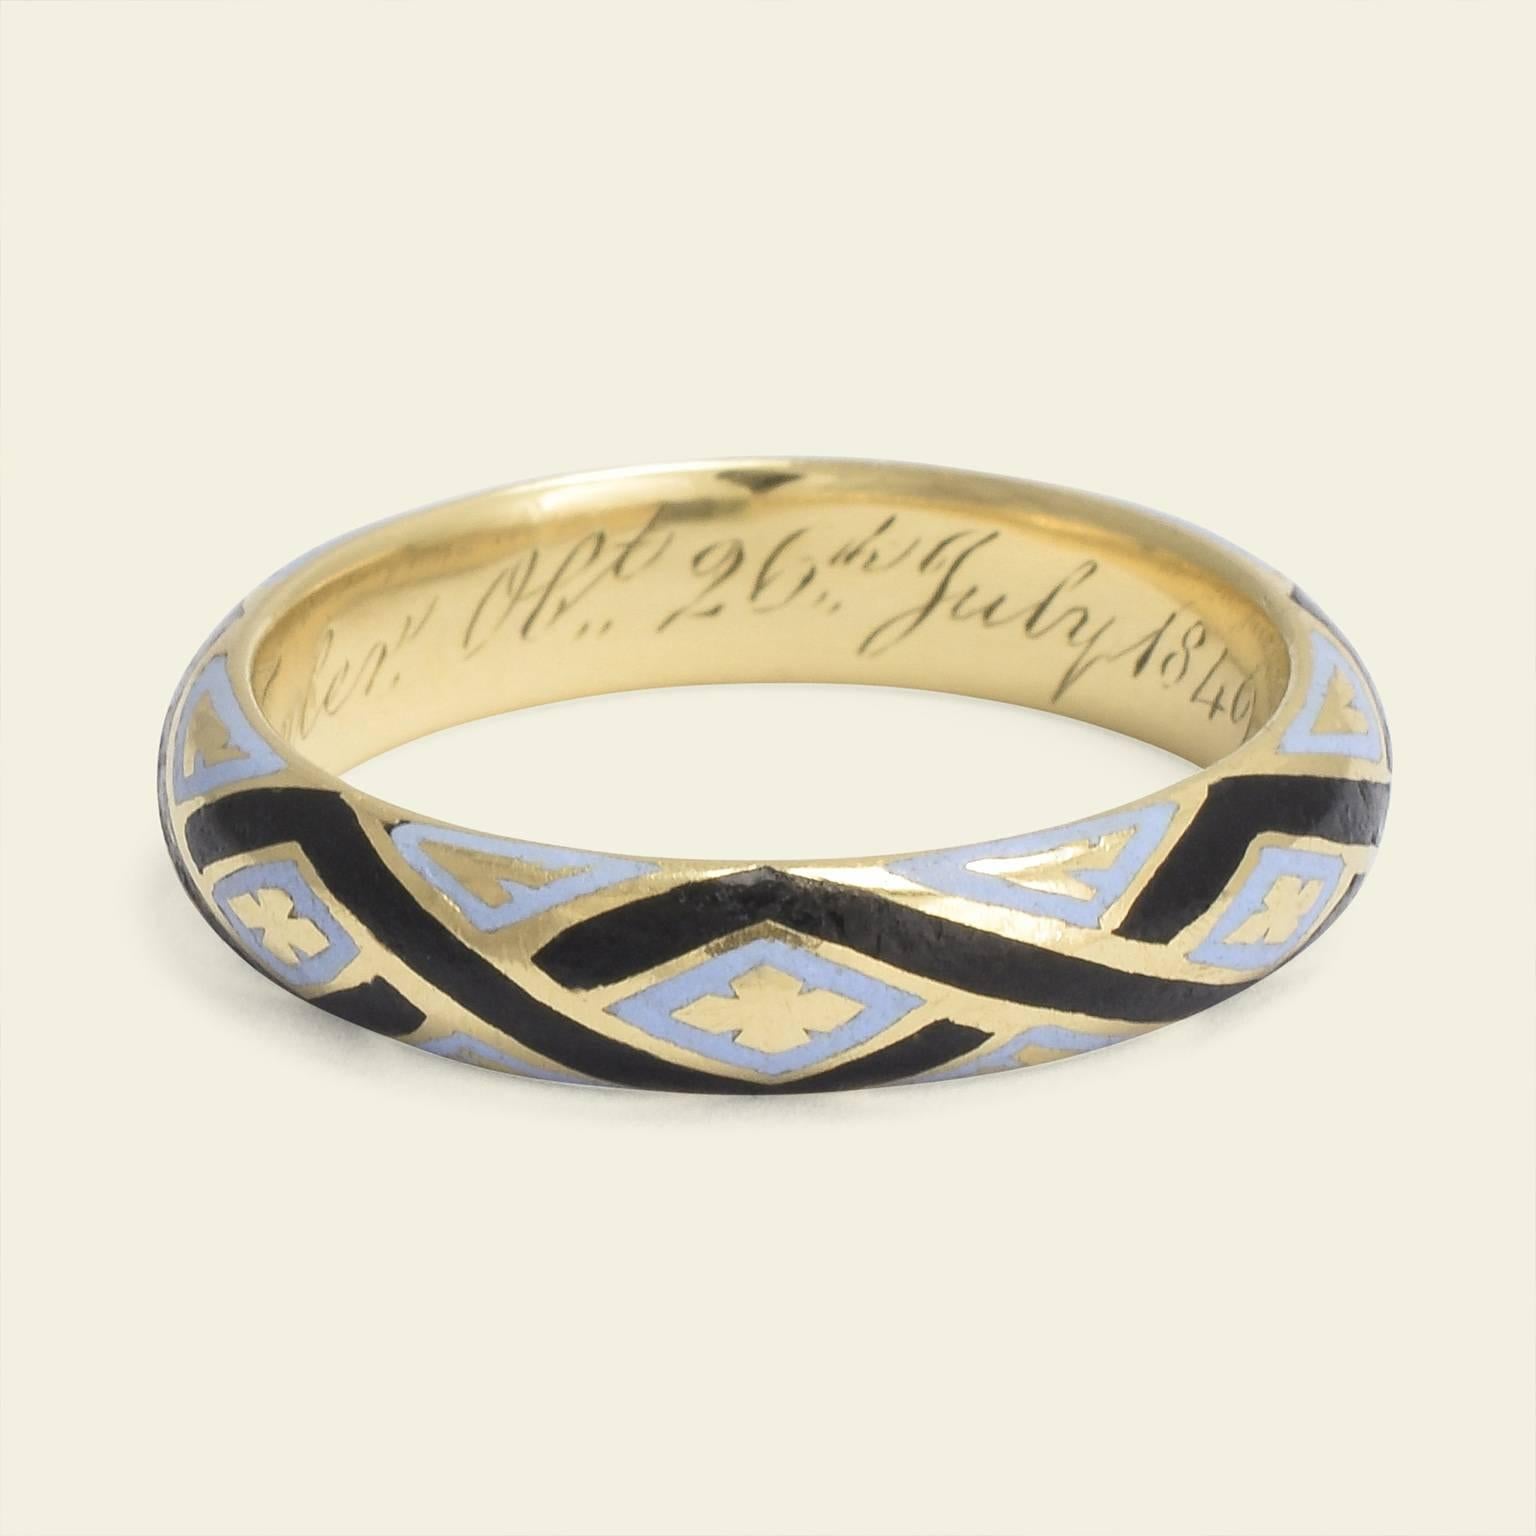 Mid-Victorian Pale Blue and Black Enamel Mourning Ring for Edward Clay ...